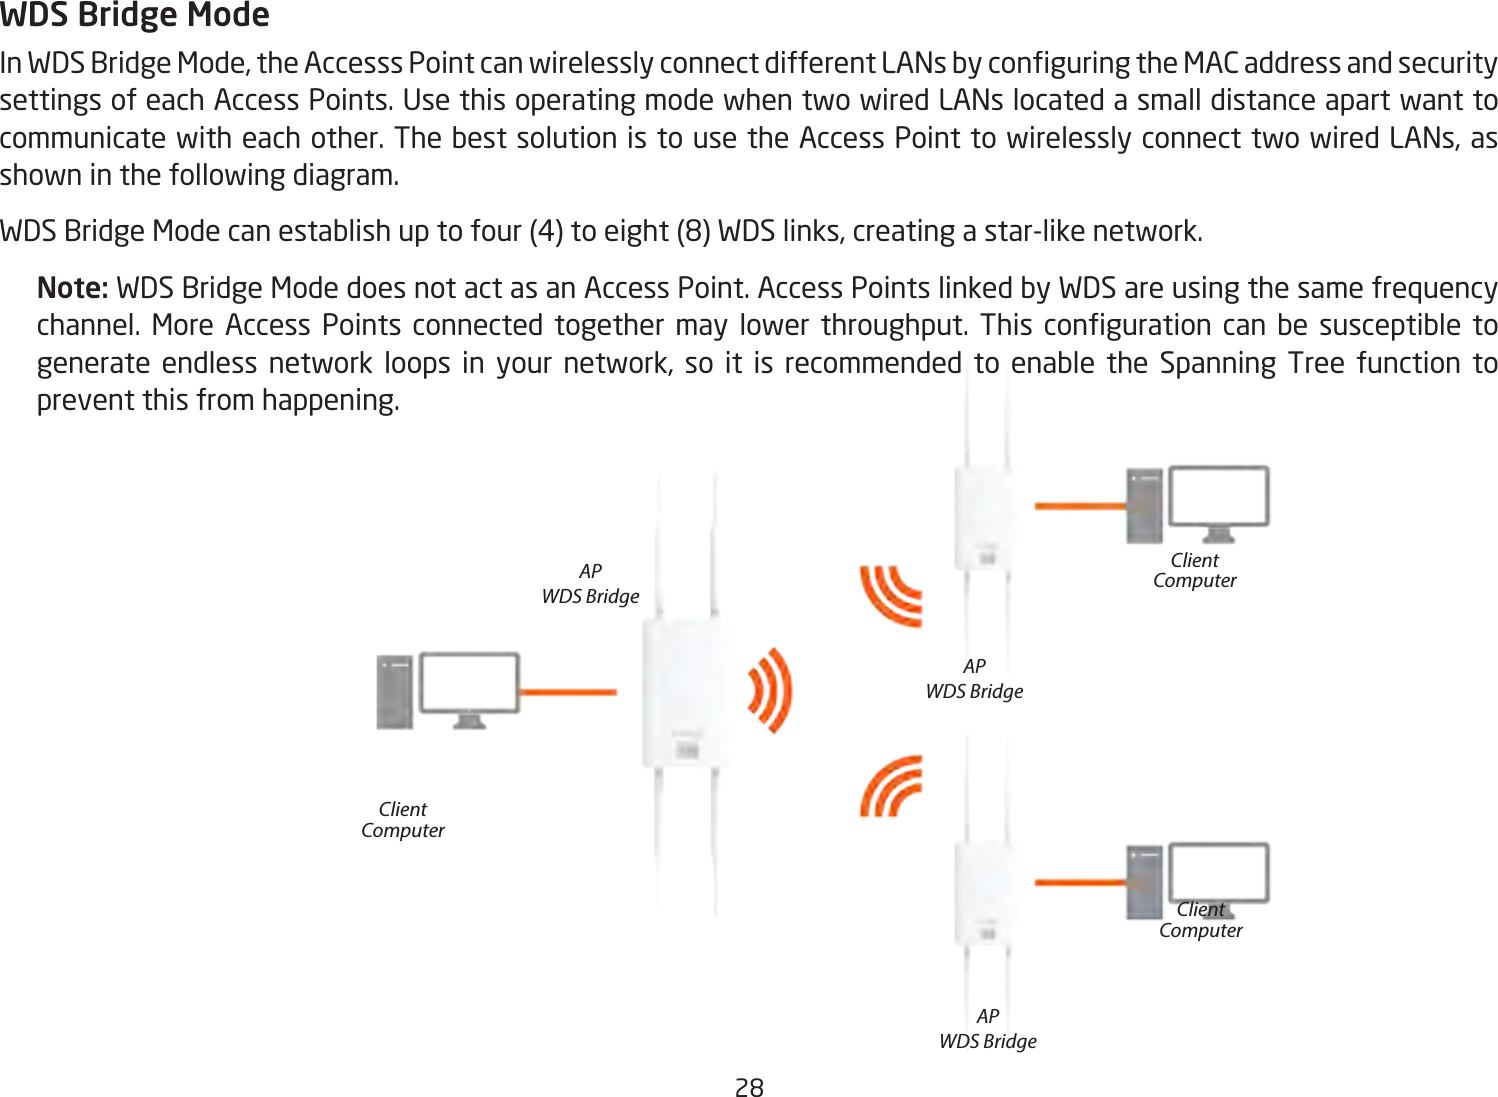 28WDS Bridge ModeInWDSBridgeMode,theAccesssPointcanwirelesslyconnectdifferentLANsbyconguringtheMACaddressandsecuritysettingsofeachAccessPoints.UsethisoperatingmodewhentwowiredLANslocatedasmalldistanceapartwanttocommunicate with each other. The best solution is to use the Access Point to wirelessly connect two wired LANs, as shown in the following diagram. WDSBridgeModecanestablishuptofour(4)toeight(8)WDSlinks,creatingastar-likenetwork.Note: WDS Bridge Mode does not act as an Access Point. Access Points linked by WDS are using the same frequency channel. More Access Points connected together may lower throughput. This conguration can be susceptible togenerate endless network loops in your network, so it is recommended to enable the Spanning Tree function to prevent this from happening.APWDS BridgeAPWDS BridgeAPWDS BridgeClientComputerClientComputerClientComputer